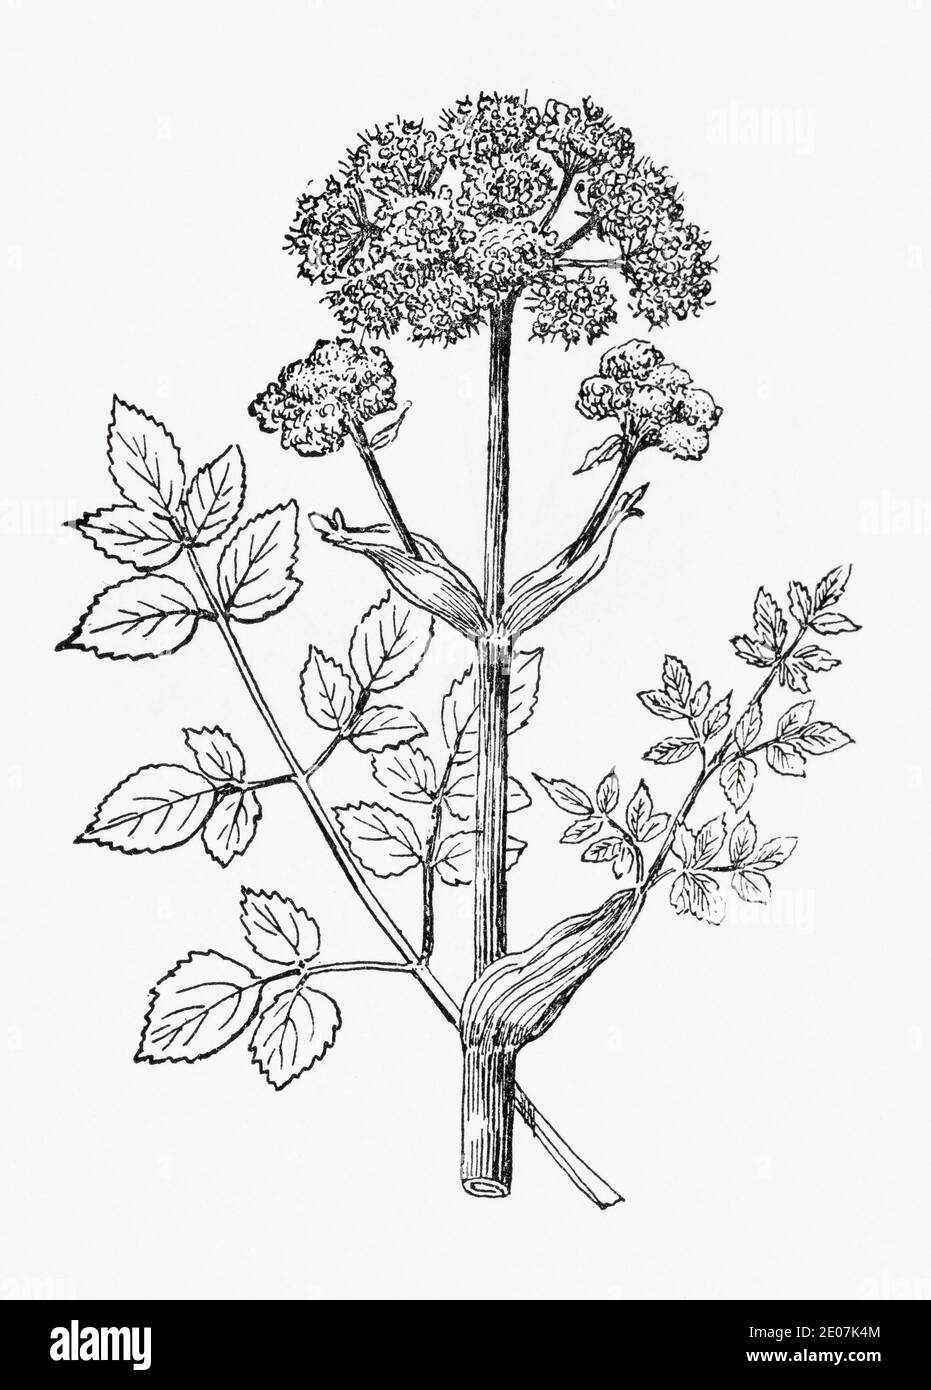 Old botanical illustration engraving of Wild Angelica, Angelica / Angelica sylvestris. Drawings of British umbellifers, & herbal plants. See Notes Stock Photo